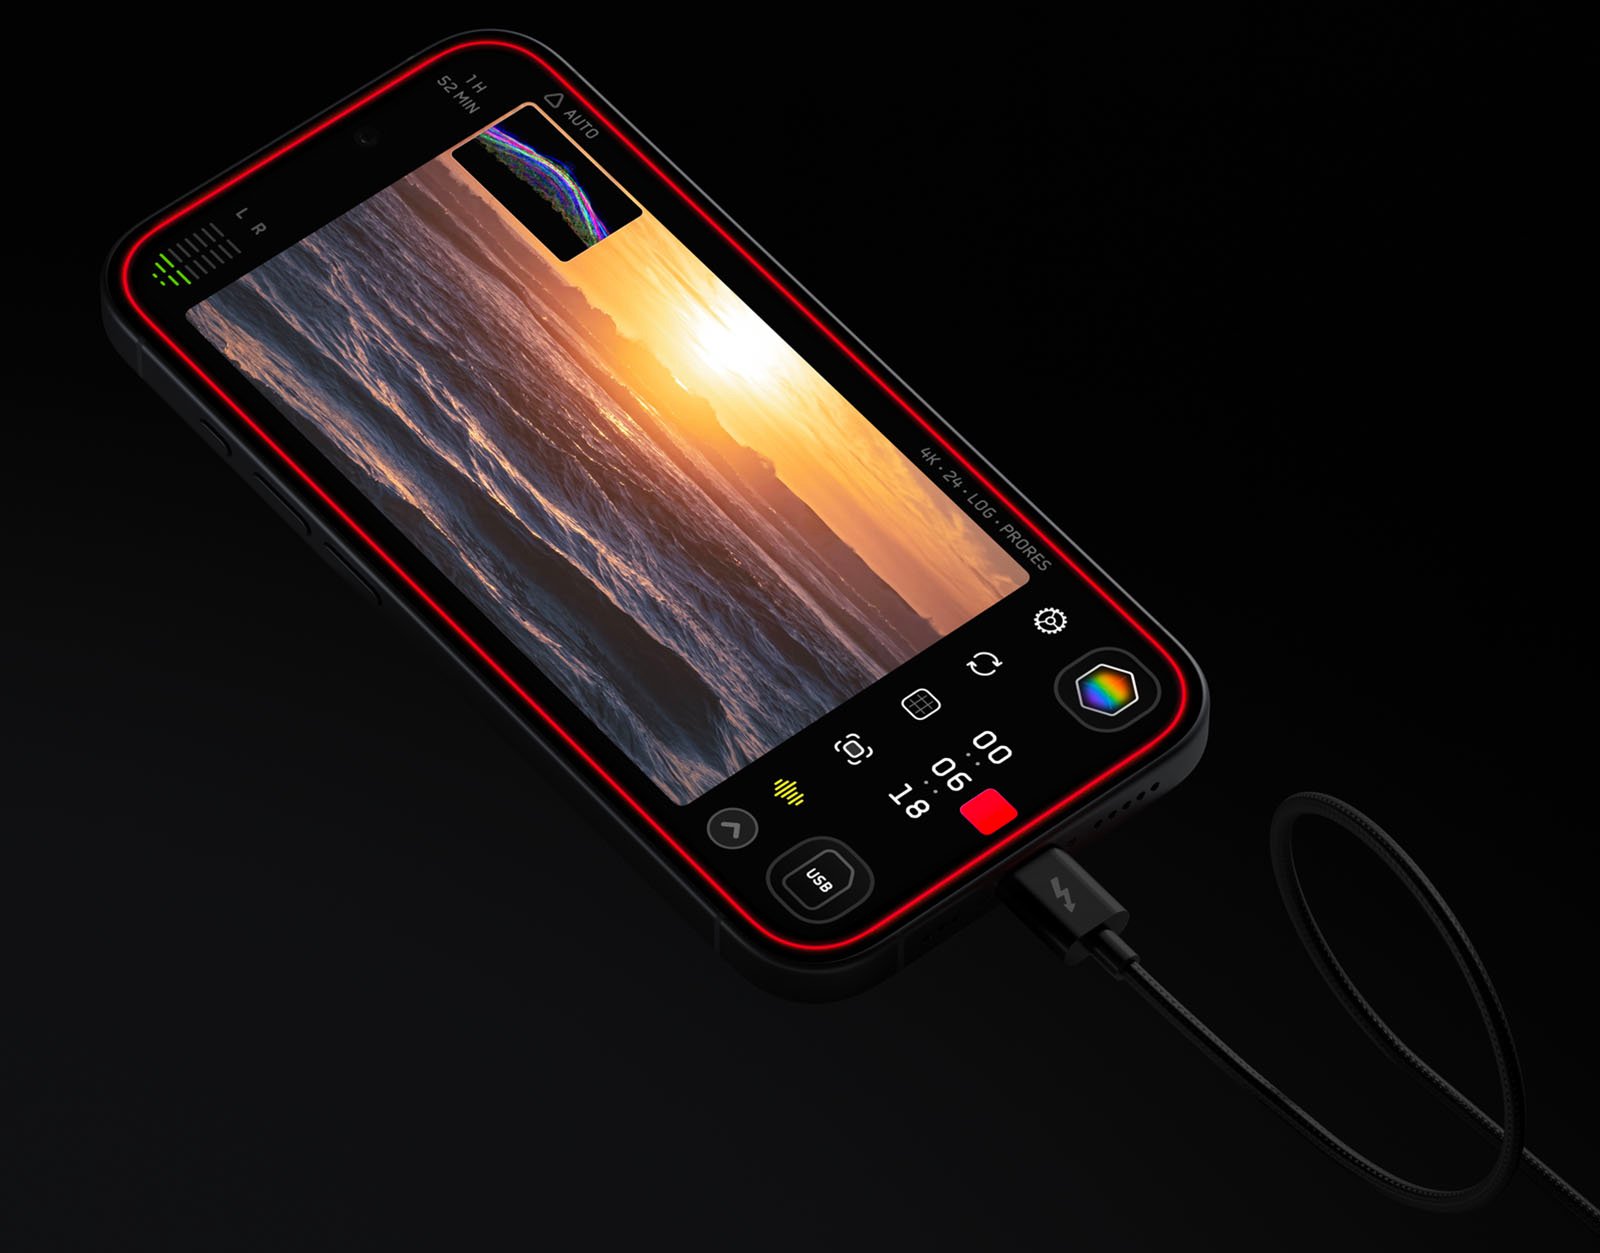 A smartphone displaying a video editing app on its screen lies against a black background. The phone is connected to a cable. The app shows a video clip of a sunset over the ocean, with various editing tools and interface icons visible around the display.